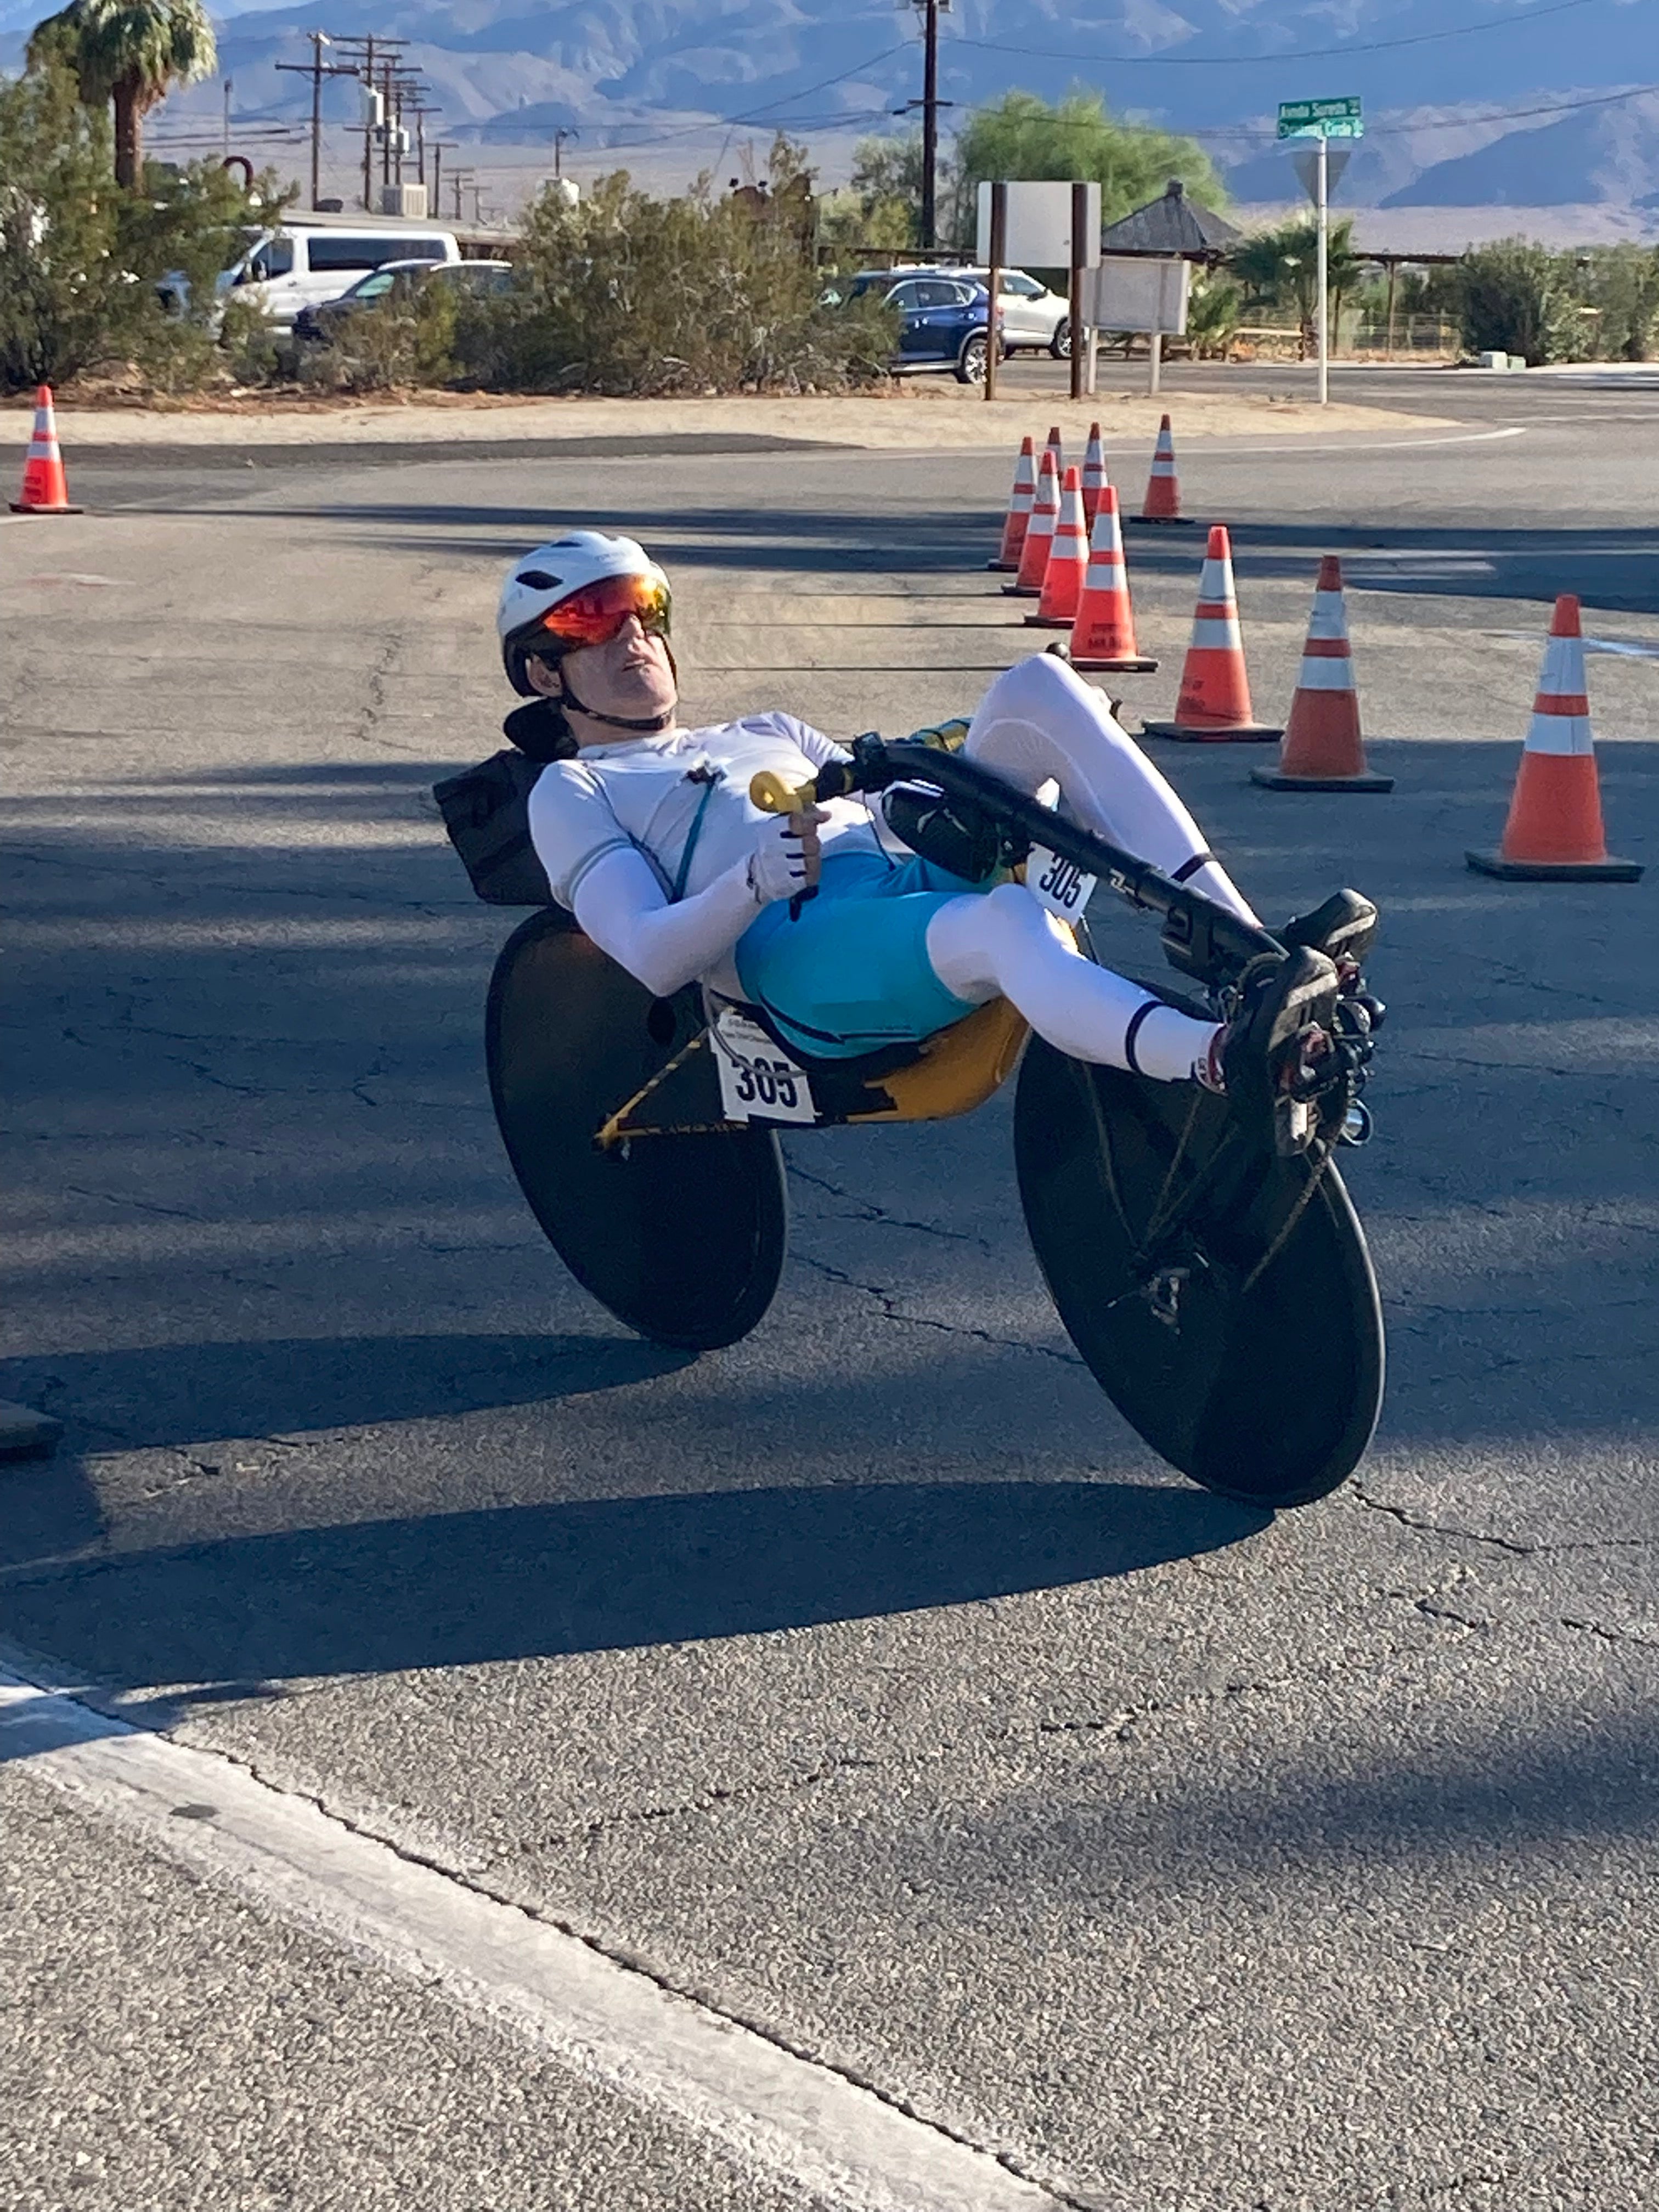 Racing through the pit at Borrego Springs World Time Trial Championships